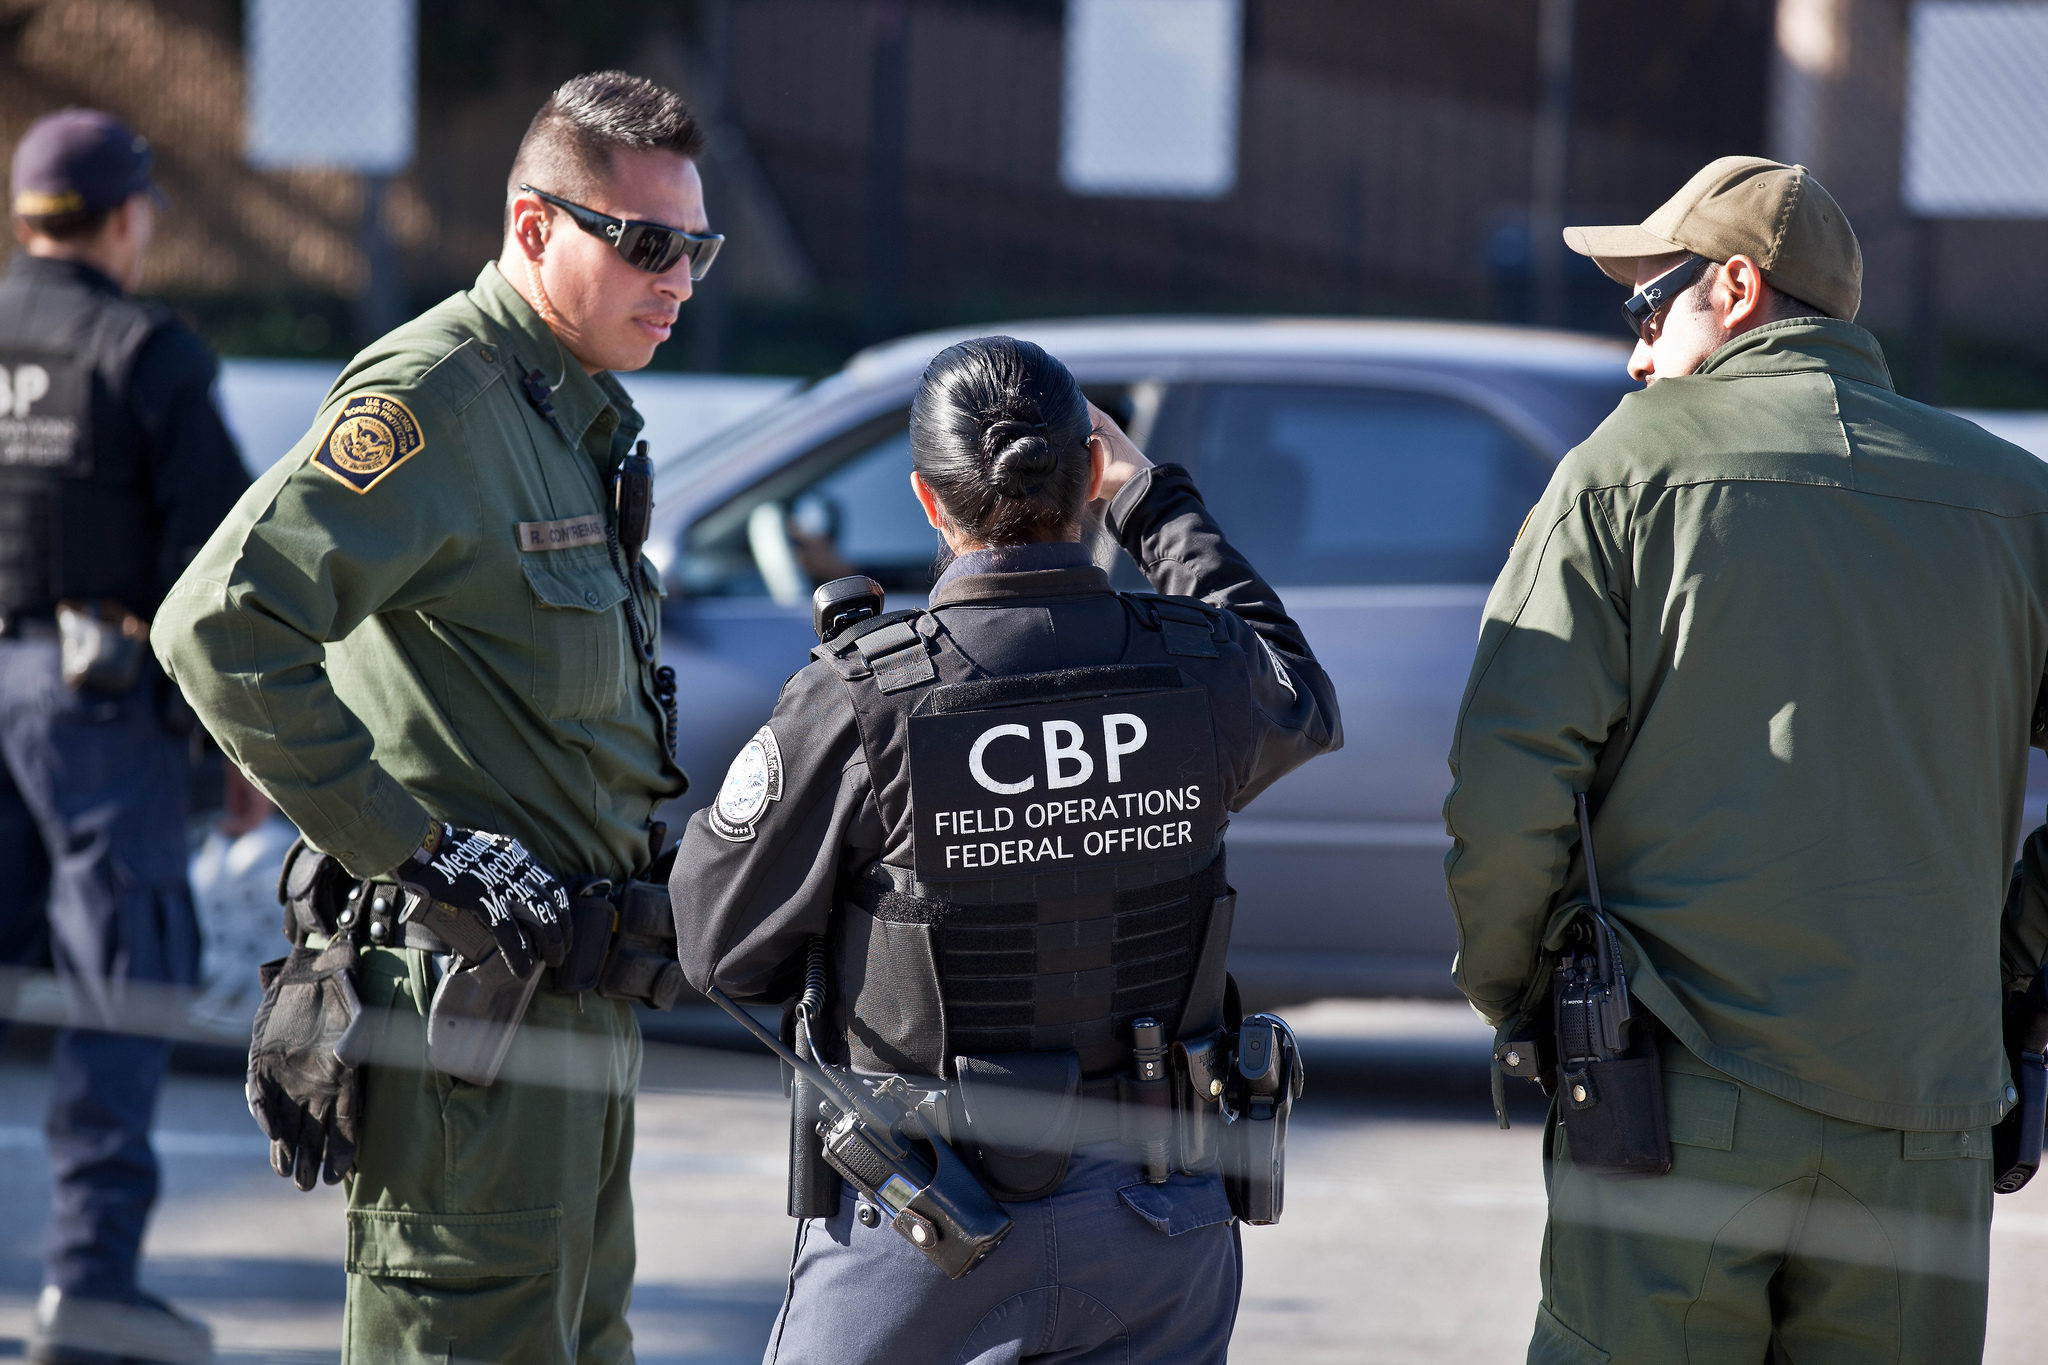 New Report Calls into Question CBP’s Use of Force Policy